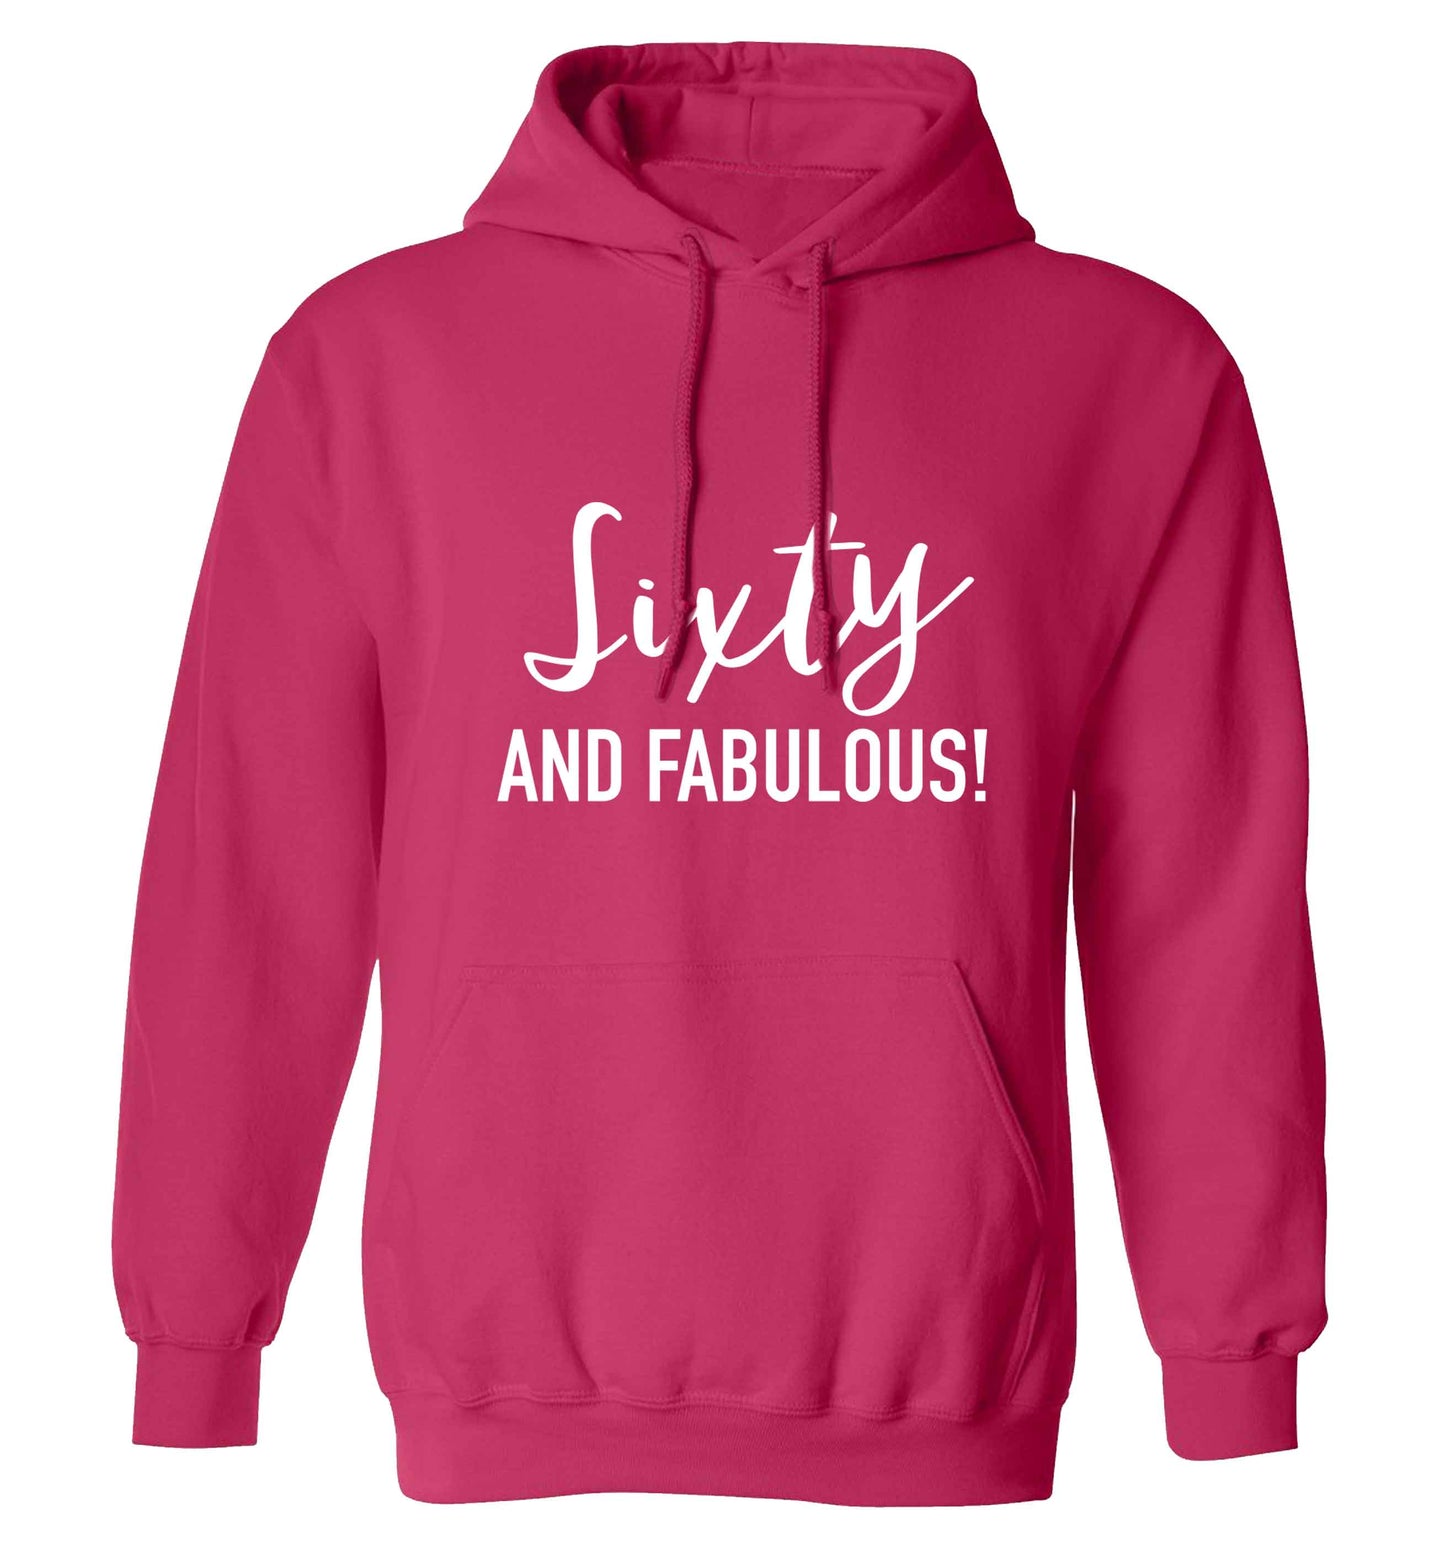 Sixty and fabulous adults unisex pink hoodie 2XL